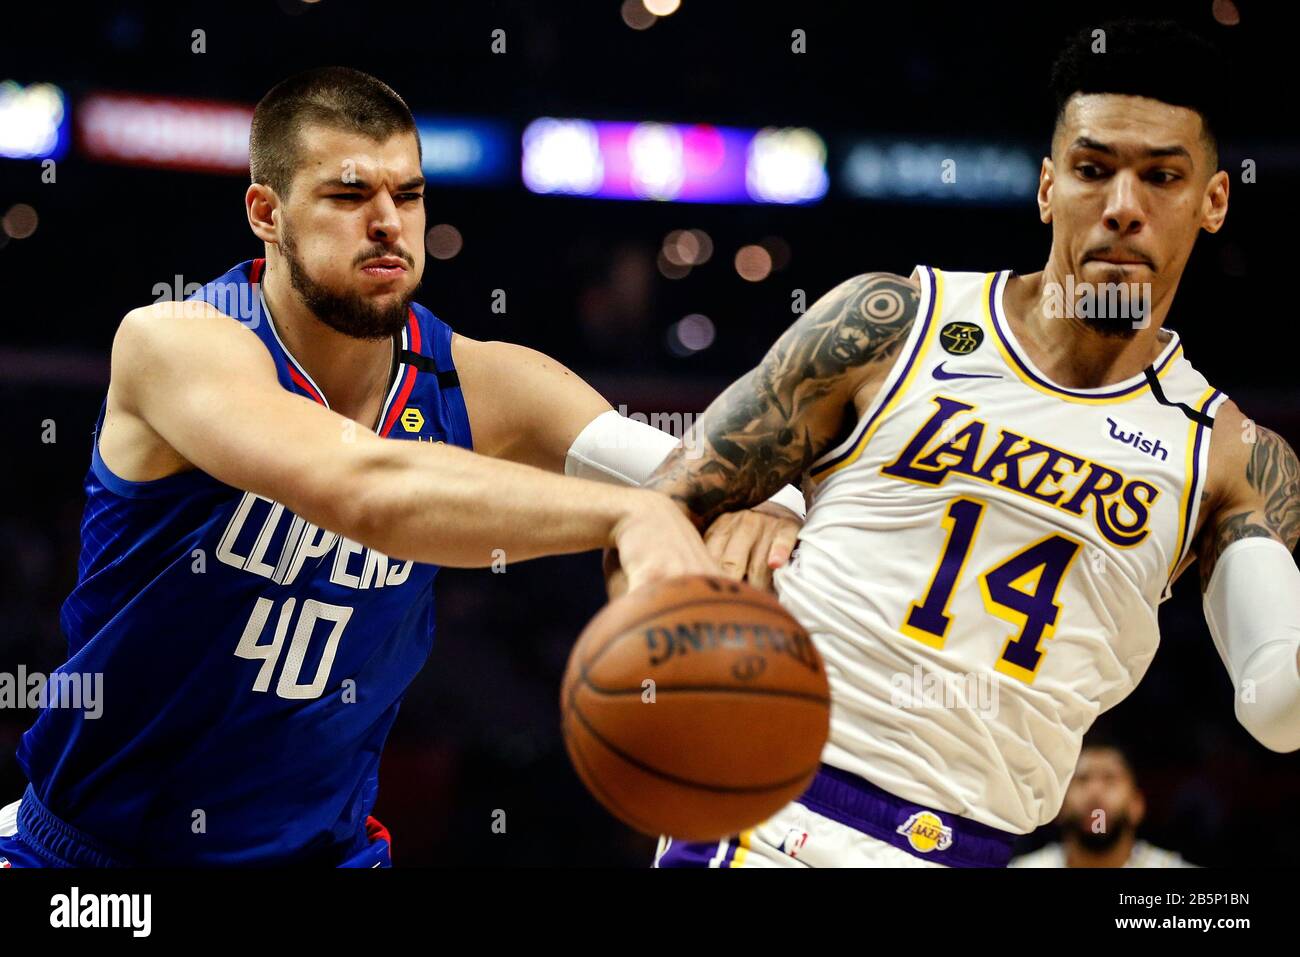 Los Angeles, California, USA. 8th Mar, 2020. Los Angeles Lakers' Danny Green (14) and Los Angeles Clippers' Ivica Zubac (40) fight for the ball during an NBA basketball game between the Los Angeles Clippers and Los Angeles Lakers, Sunday, March 8, 2020, in Los Angeles. Credit: Ringo Chiu/ZUMA Wire/Alamy Live News Stock Photo